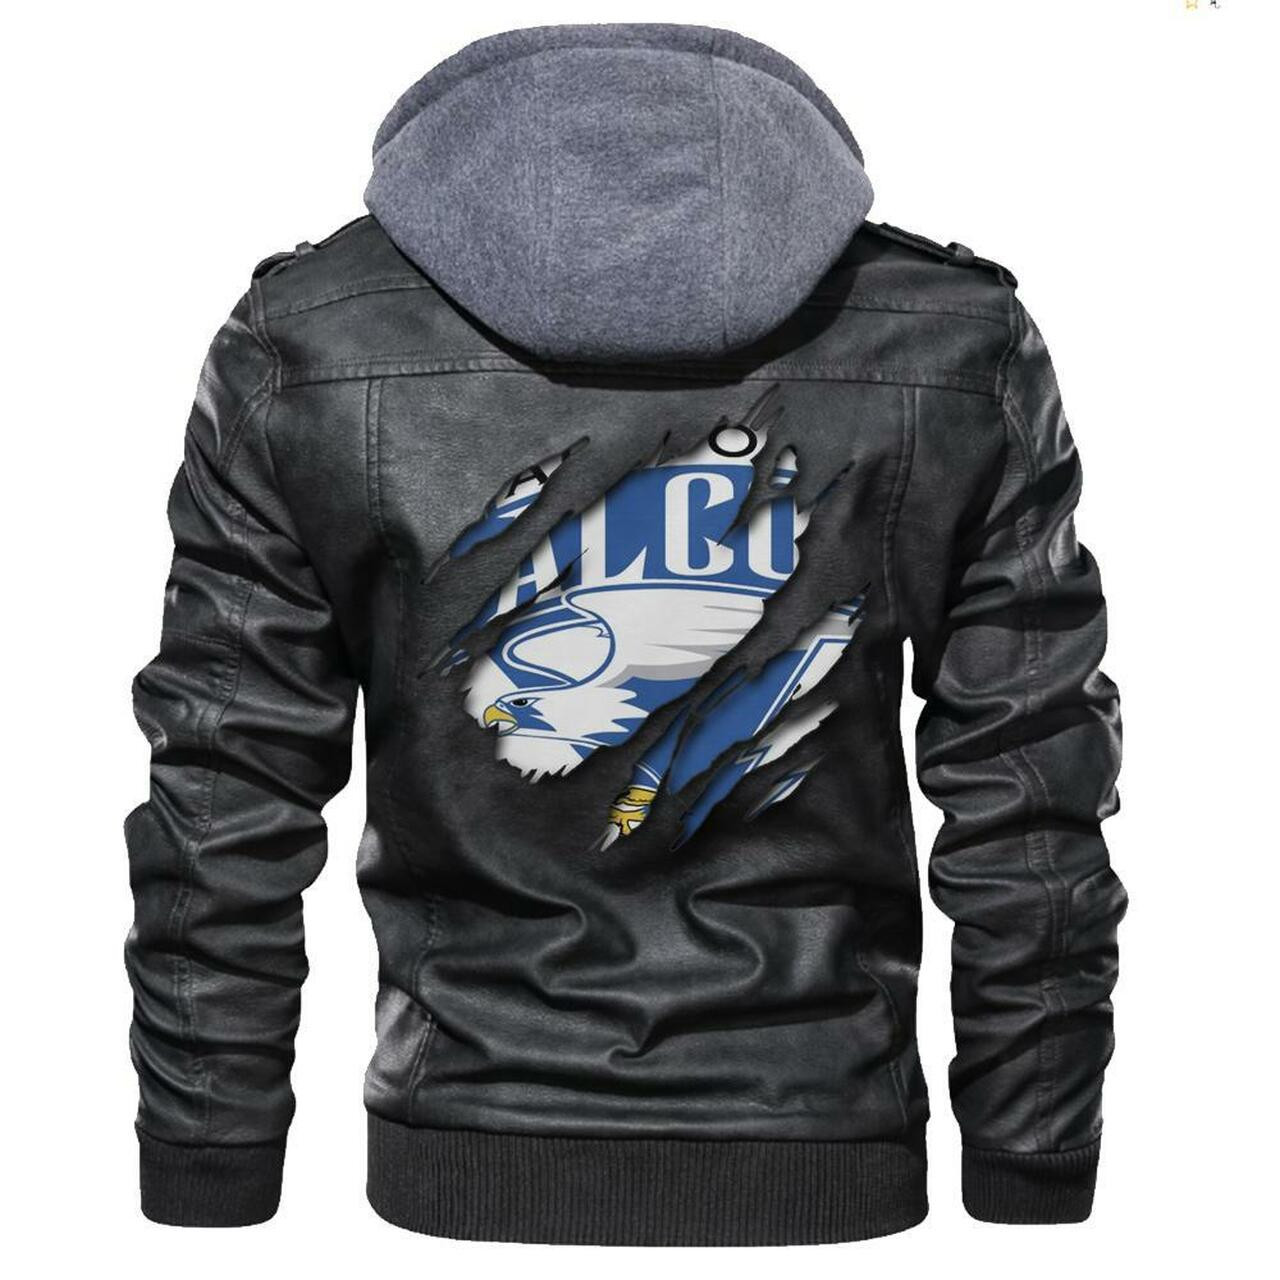 You can find a good leather jacket by access our website 65